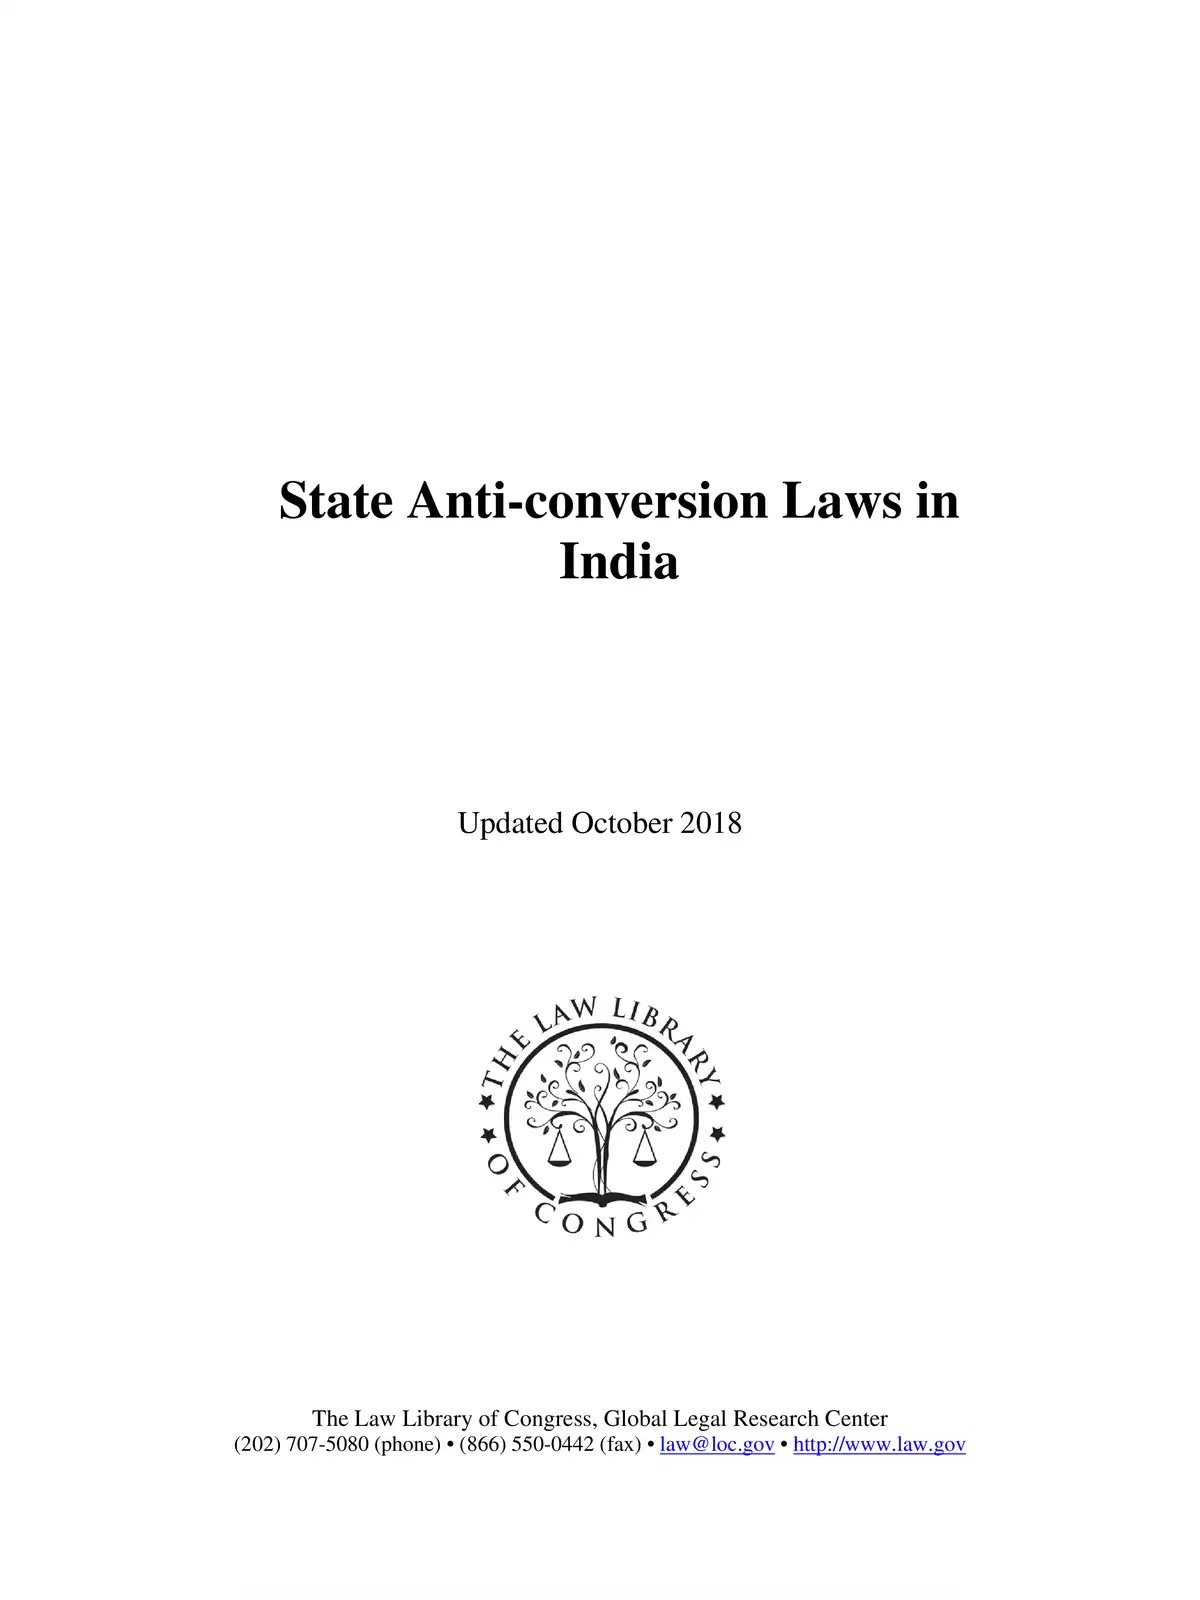 State Anti-Conversion Laws in India